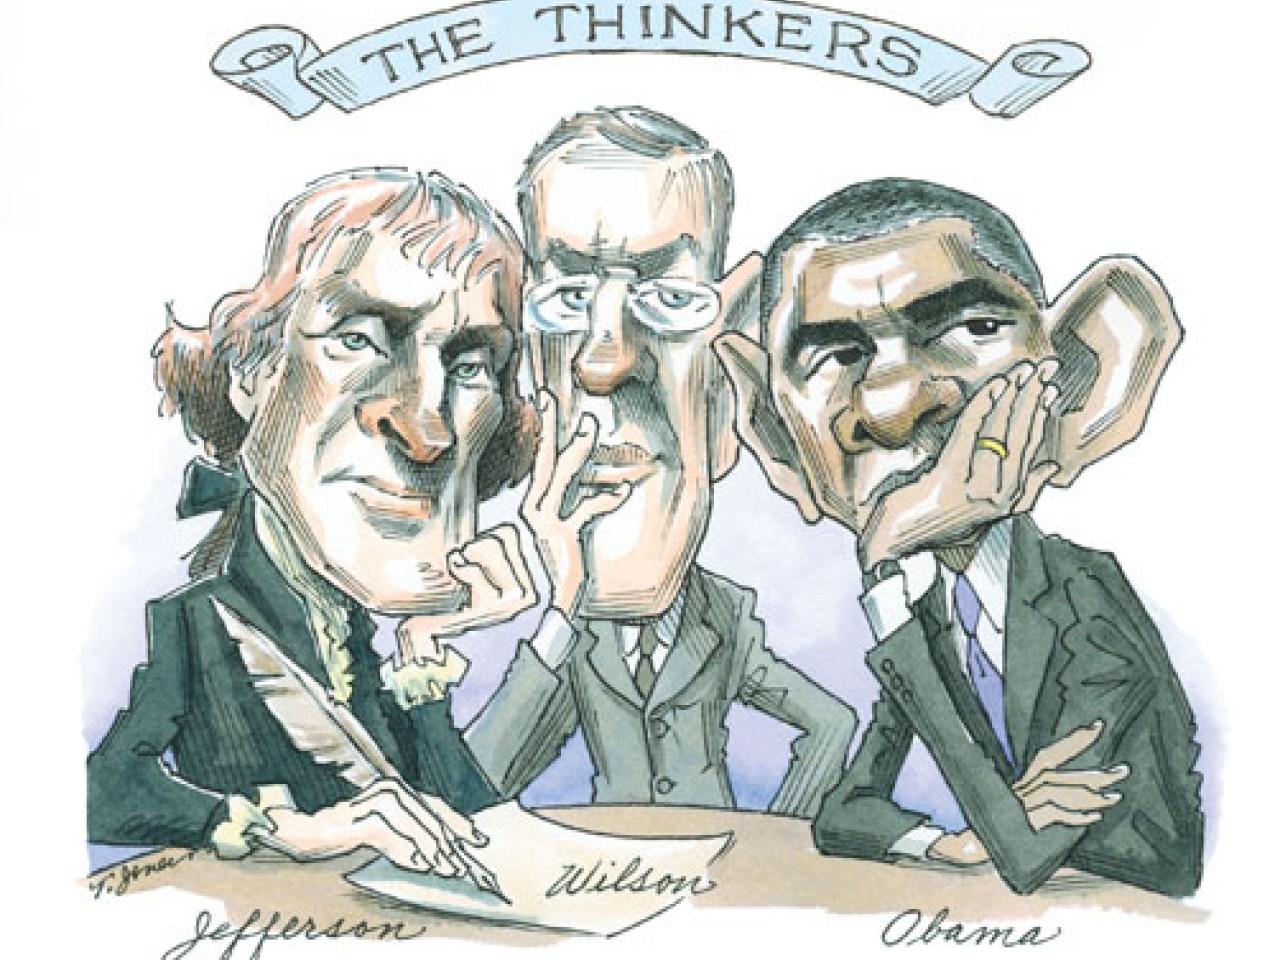 The Thinkers